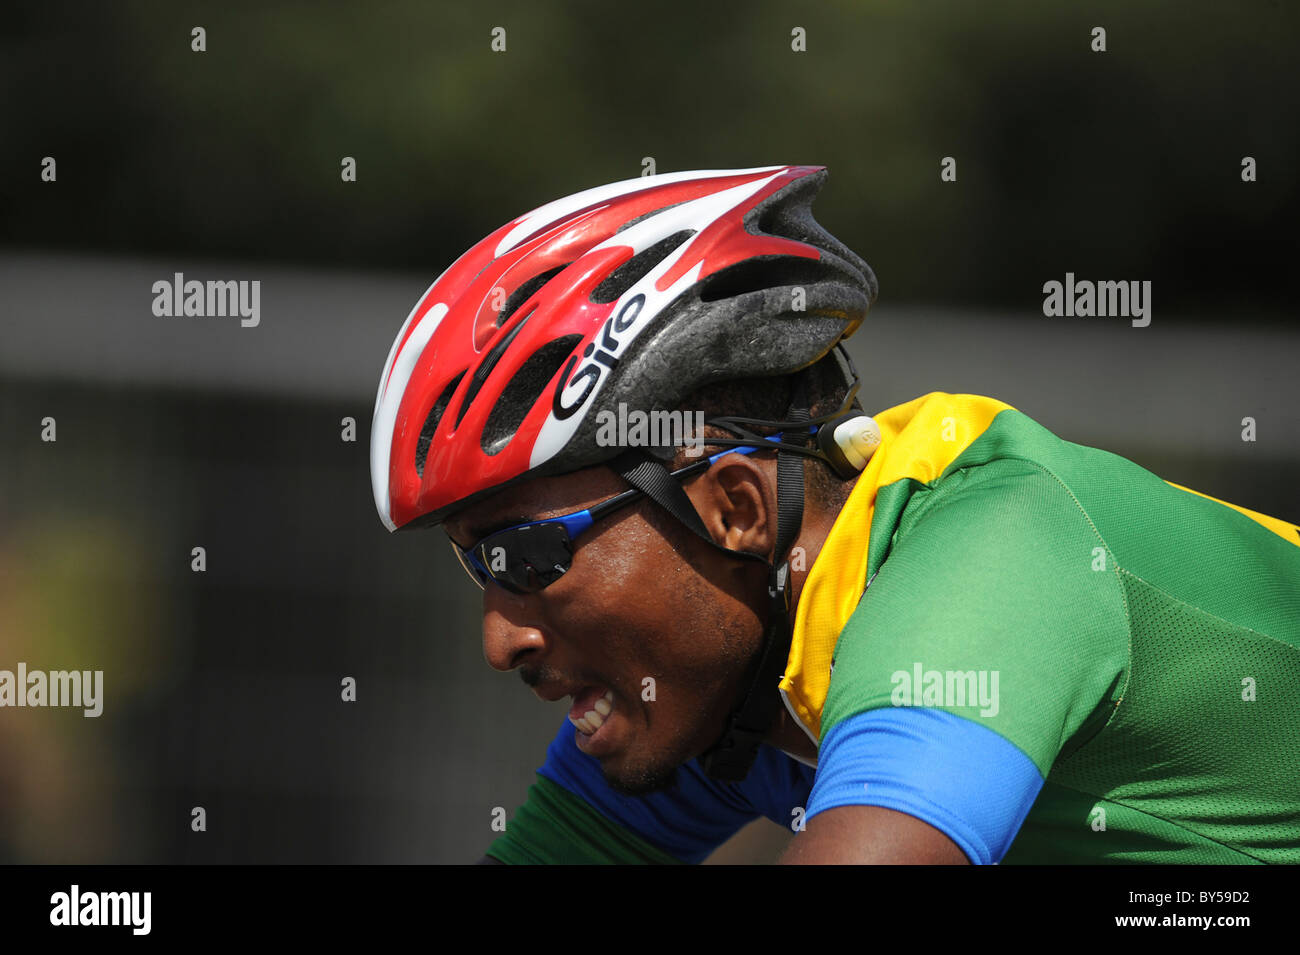 India Delhi 2010 XIX Commonwealth Games Men's road cycling race competitor. Stock Photo